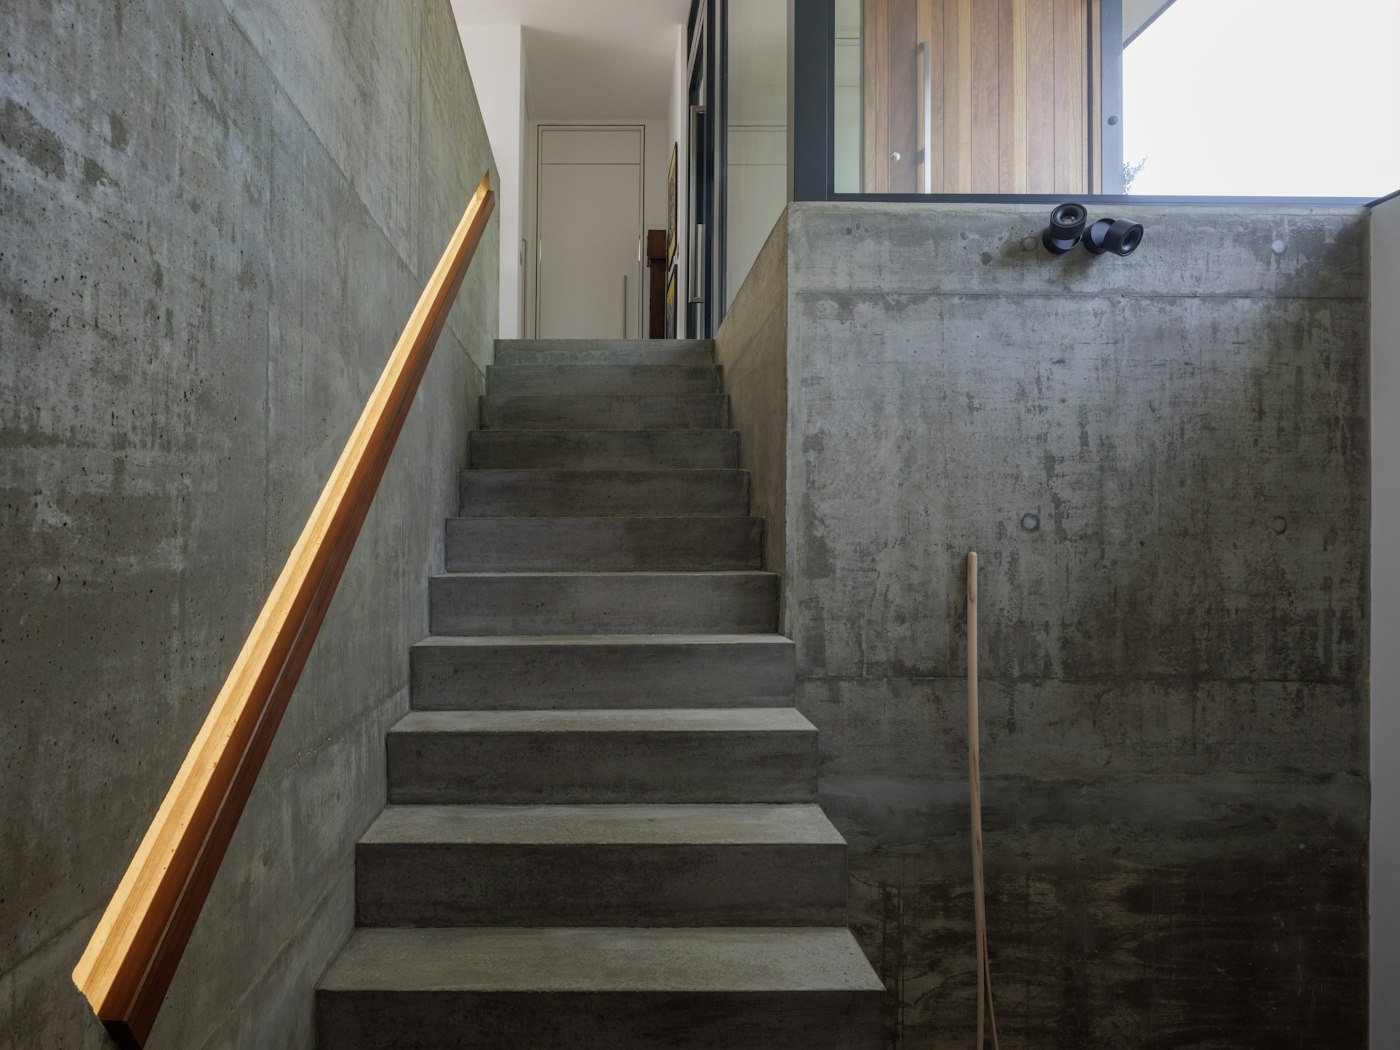 And from the bottom of the stairs, the concrete interior contrasts beautifully with the iroko front door seen through the glass